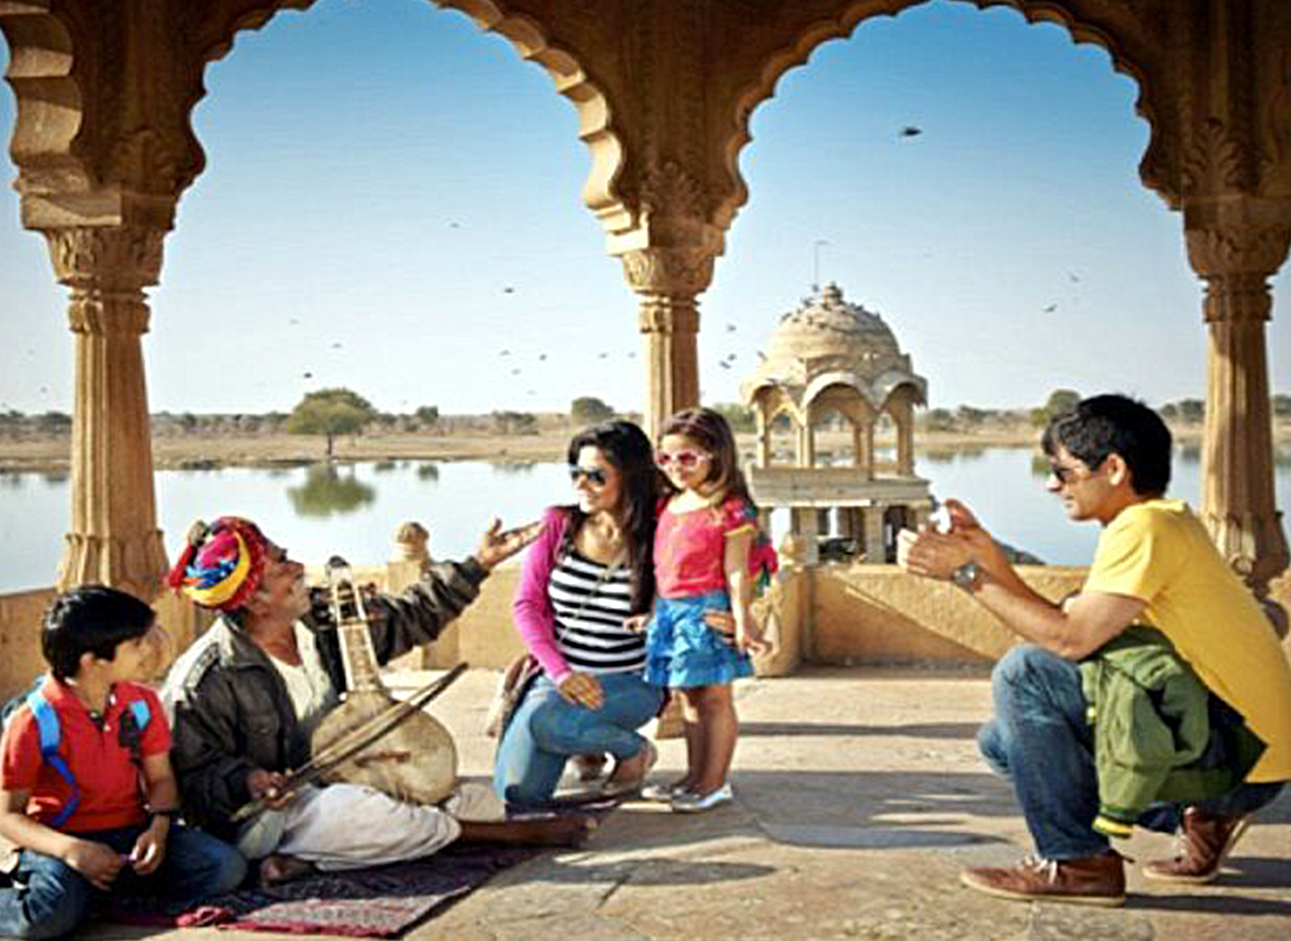 Family Vacations Trips - Create unforgettable memories with exciting family vacations